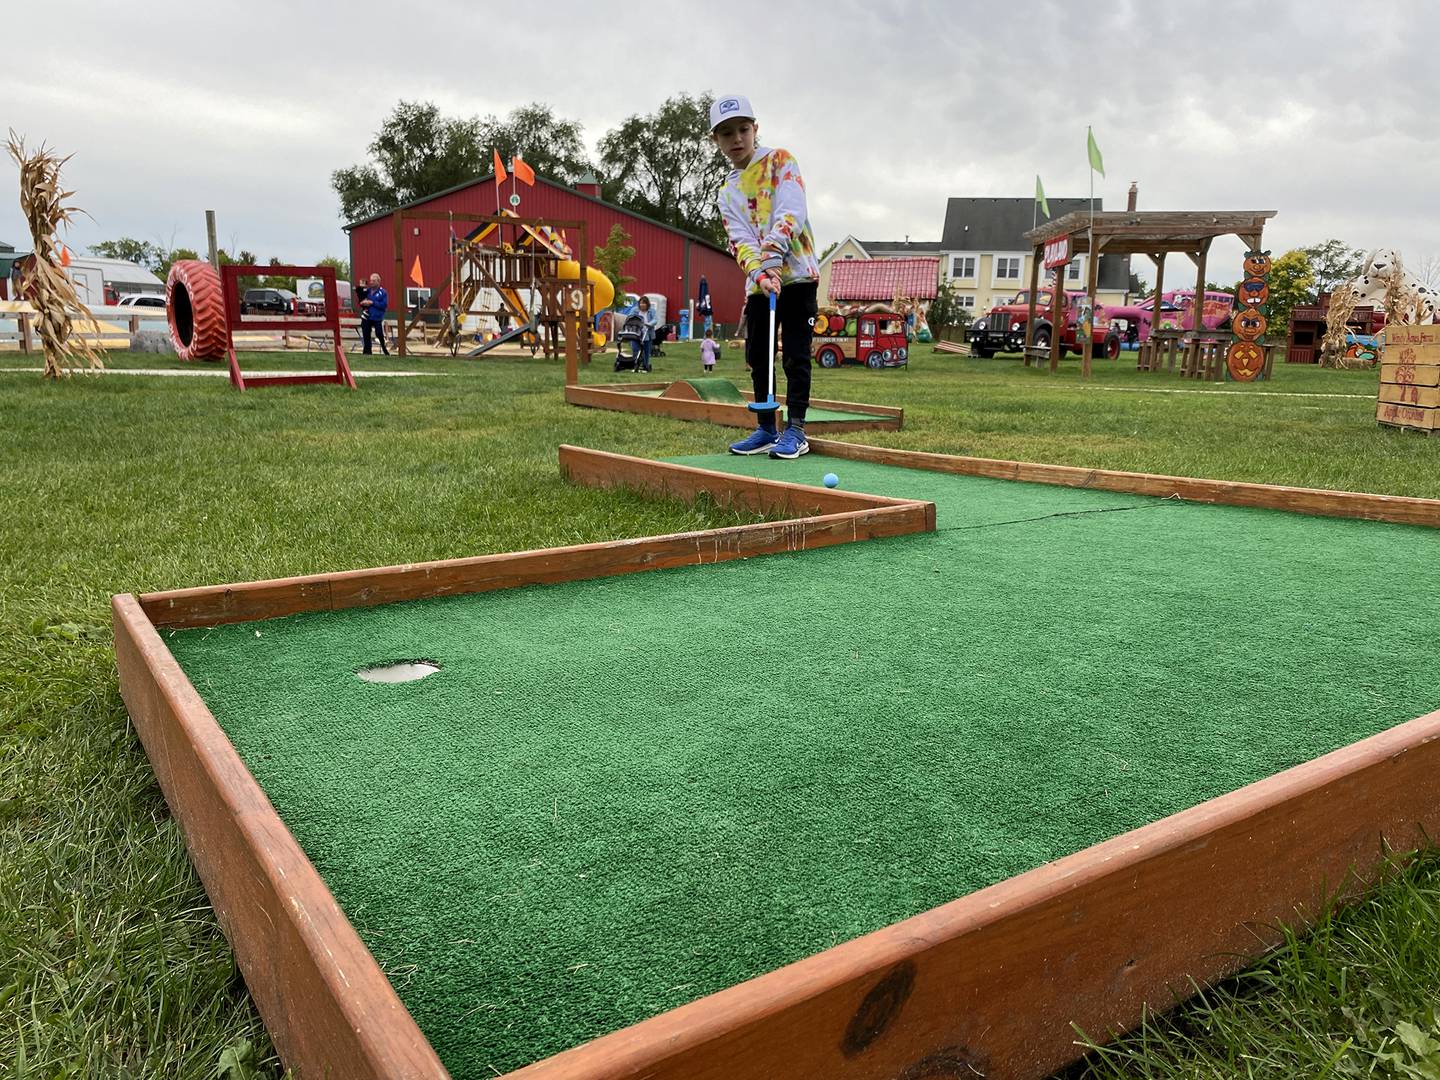 A nine-hole miniature golf course is just one of the many activities families can challenge each other to play at Windy Acres Farm, 37W446 Fabyan Parkway, Geneva.